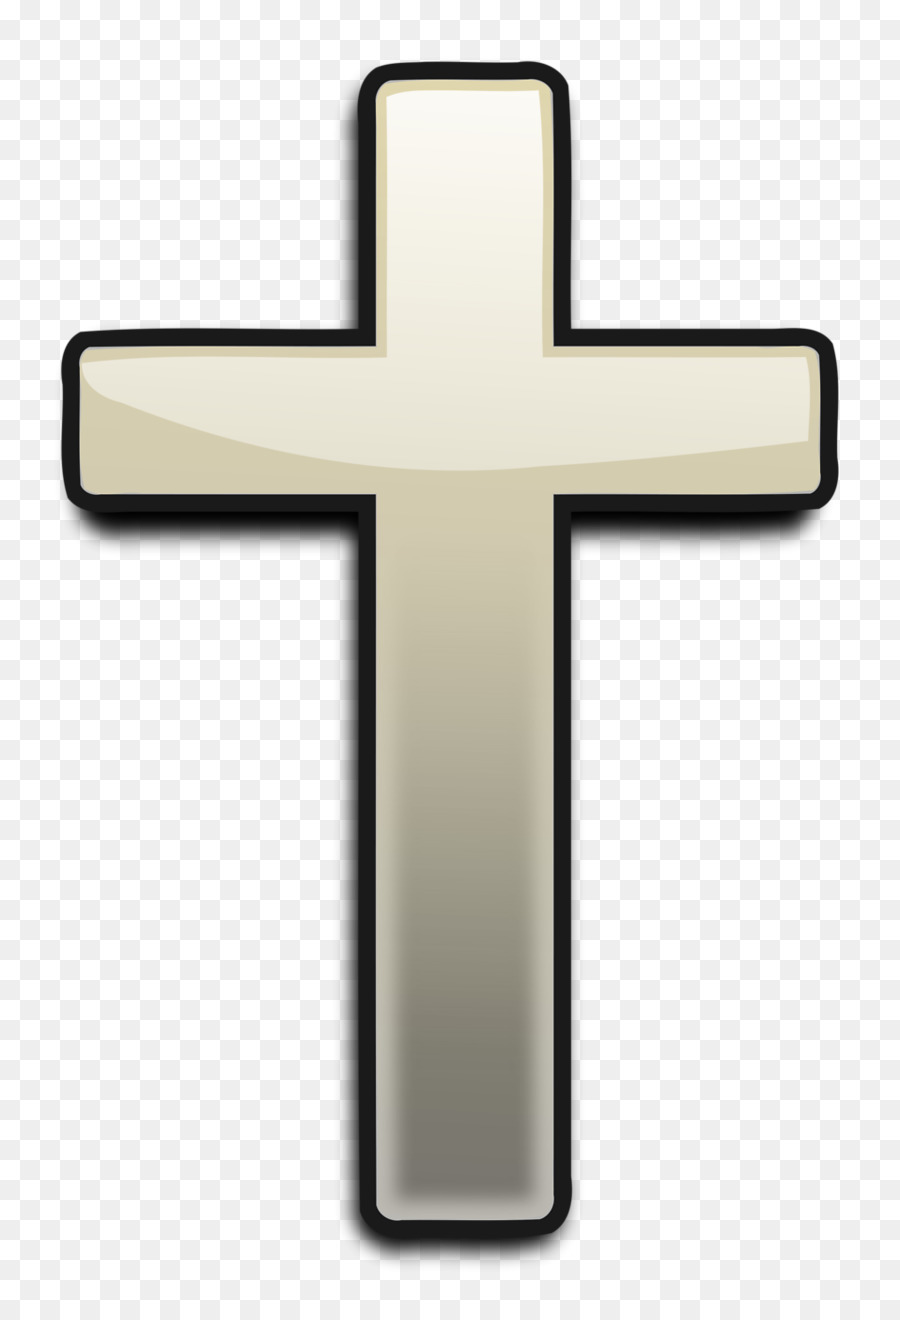 Christian cross Church Clip art - Silver Cross Cliparts png download - 958*1384 - Free Transparent Christian Cross png Download.